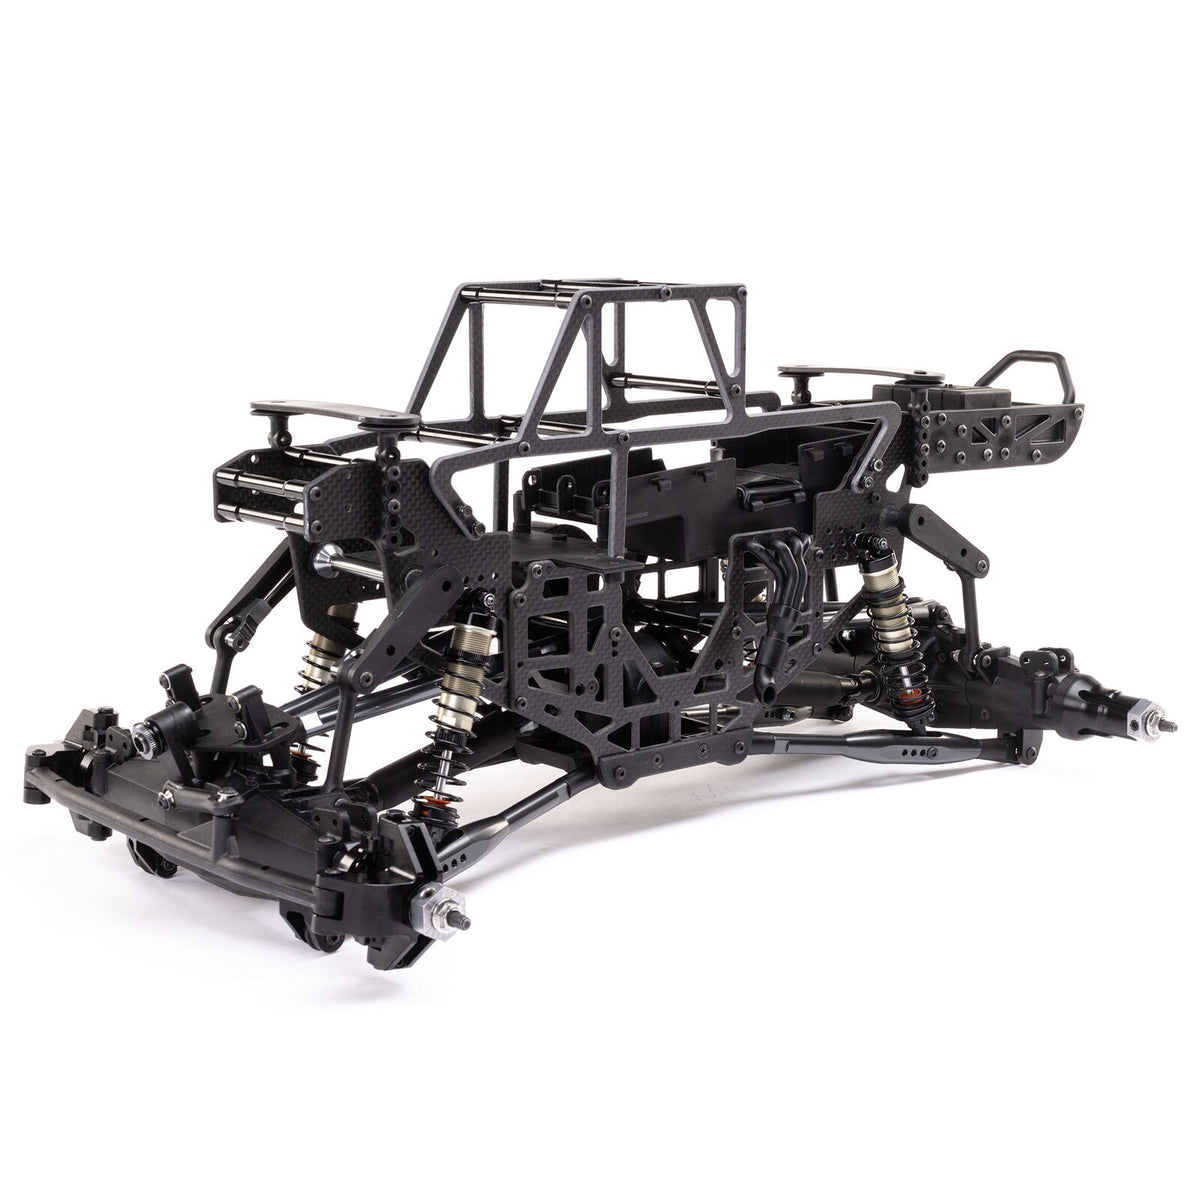 TLR Tuned LMT 4WD Solid Axle Monster Truck Kit - LOS04027